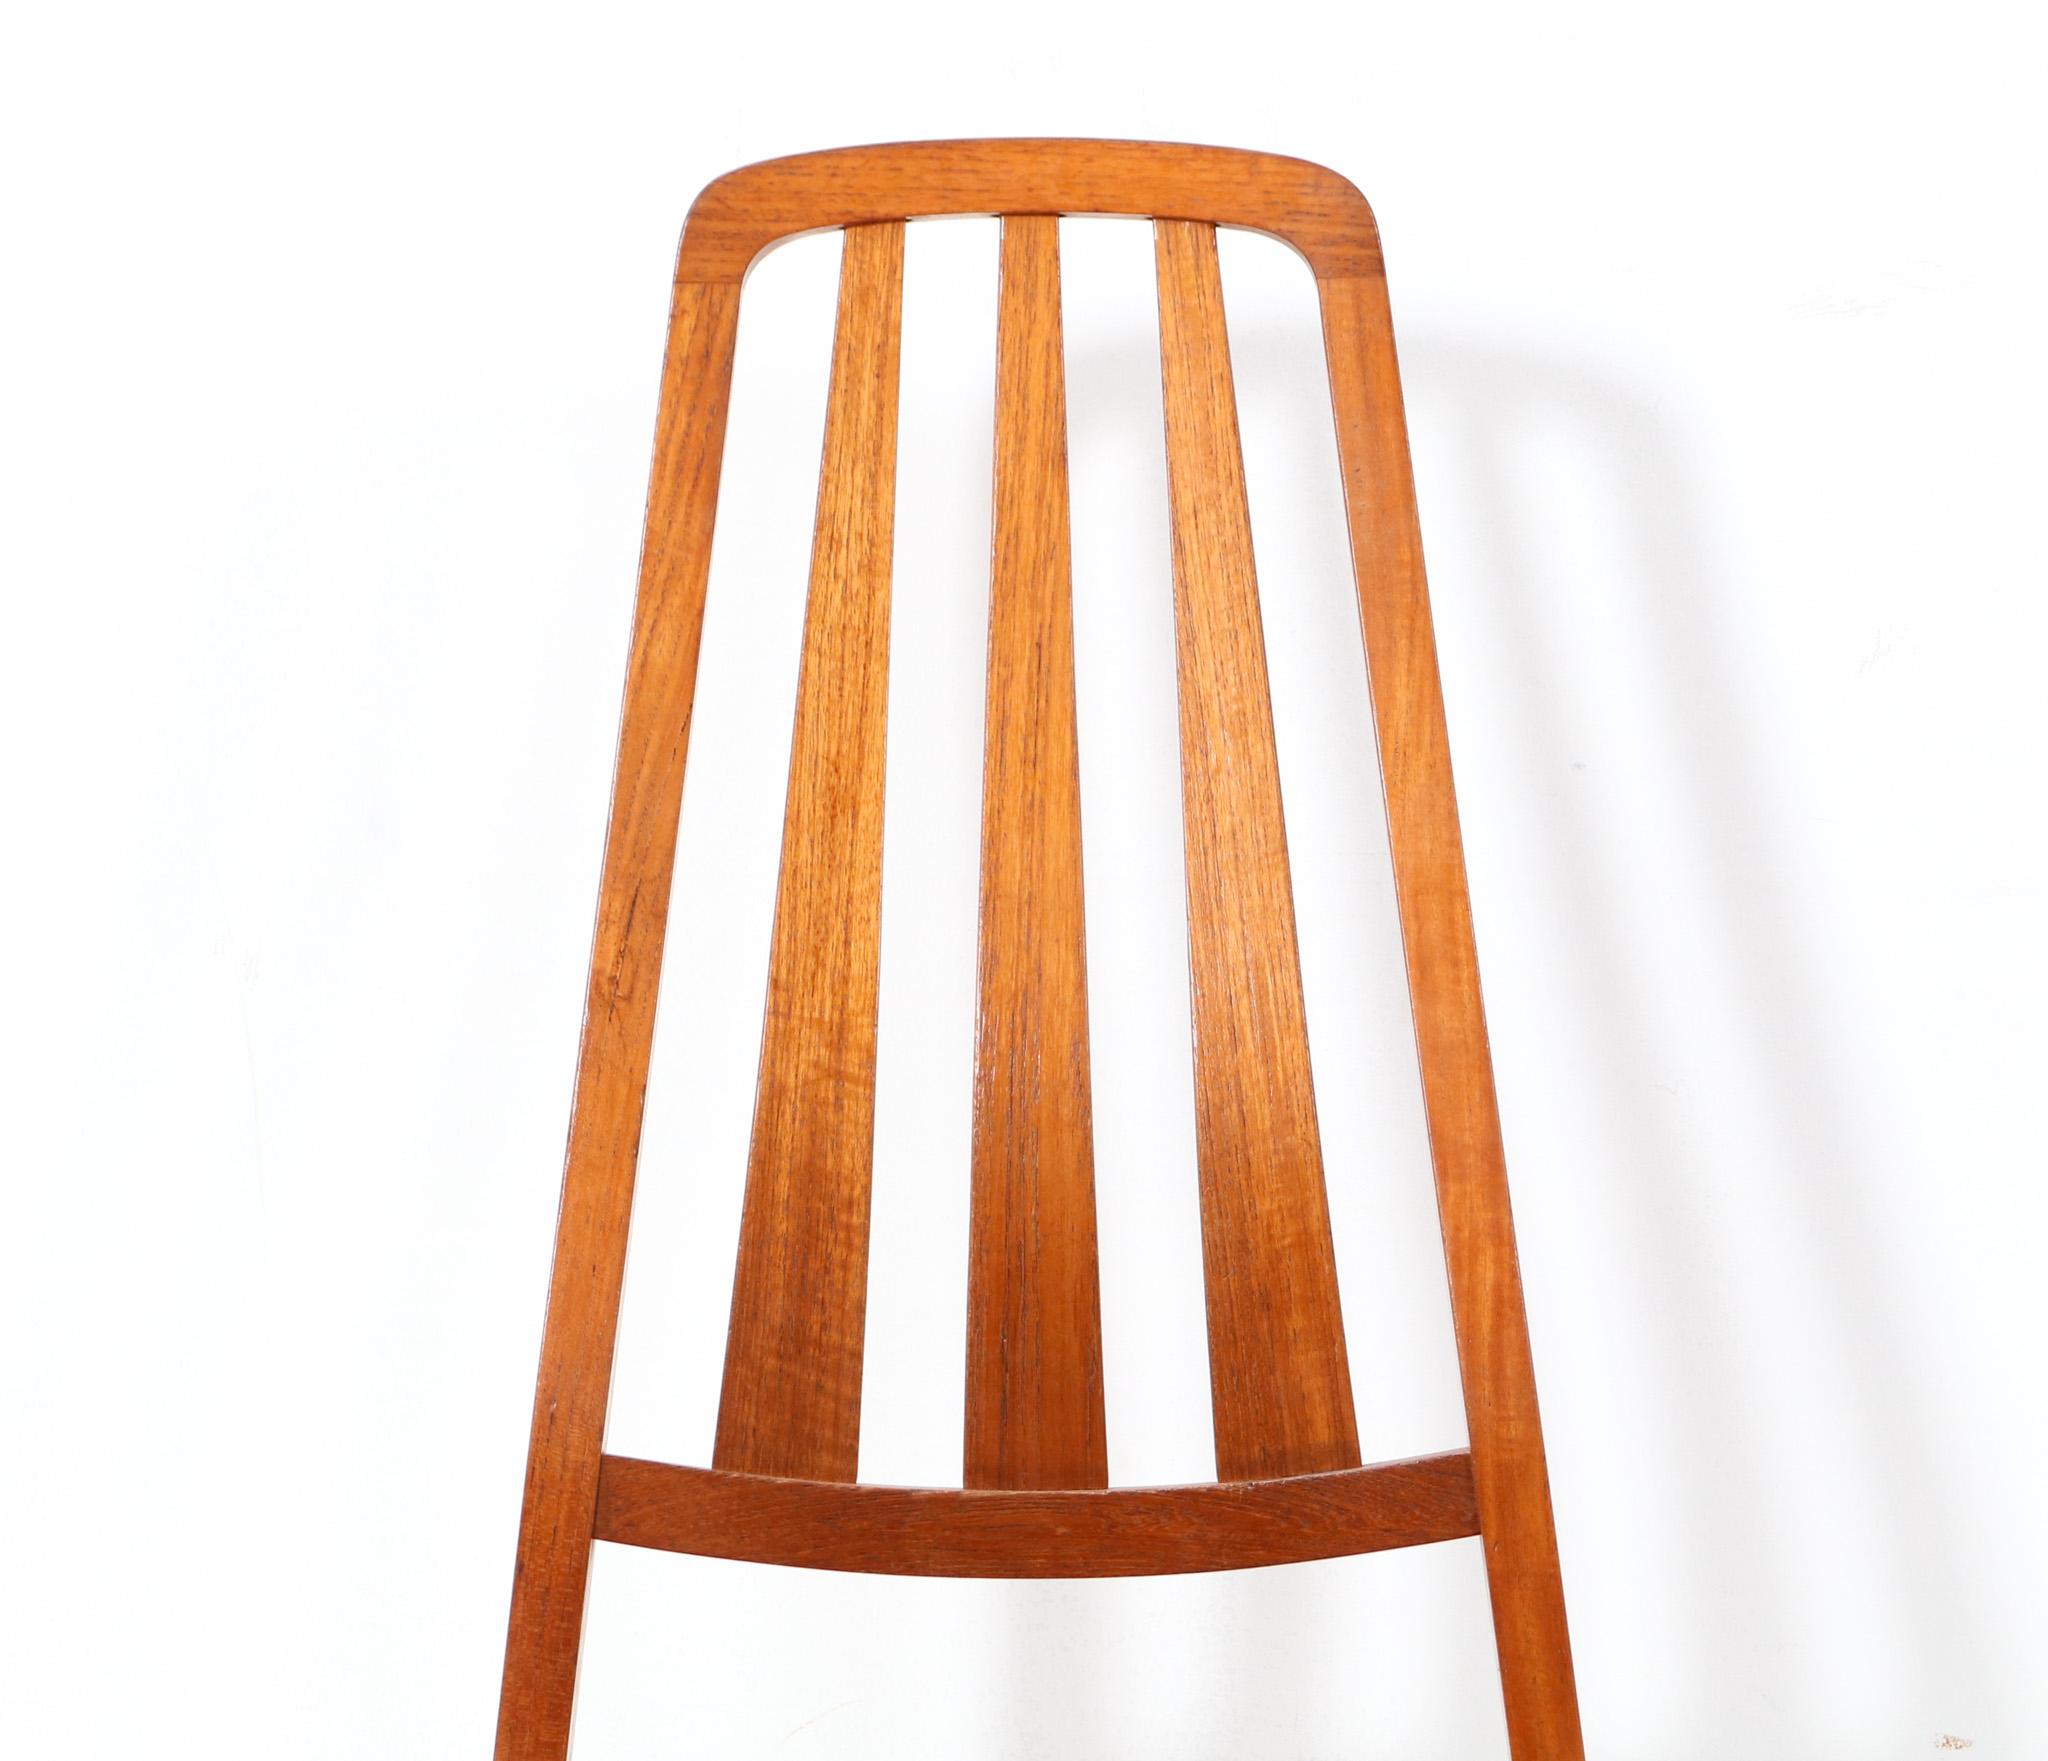 Six Teak Mid-Century Modern Dining Room Chairs, 1960s For Sale 4